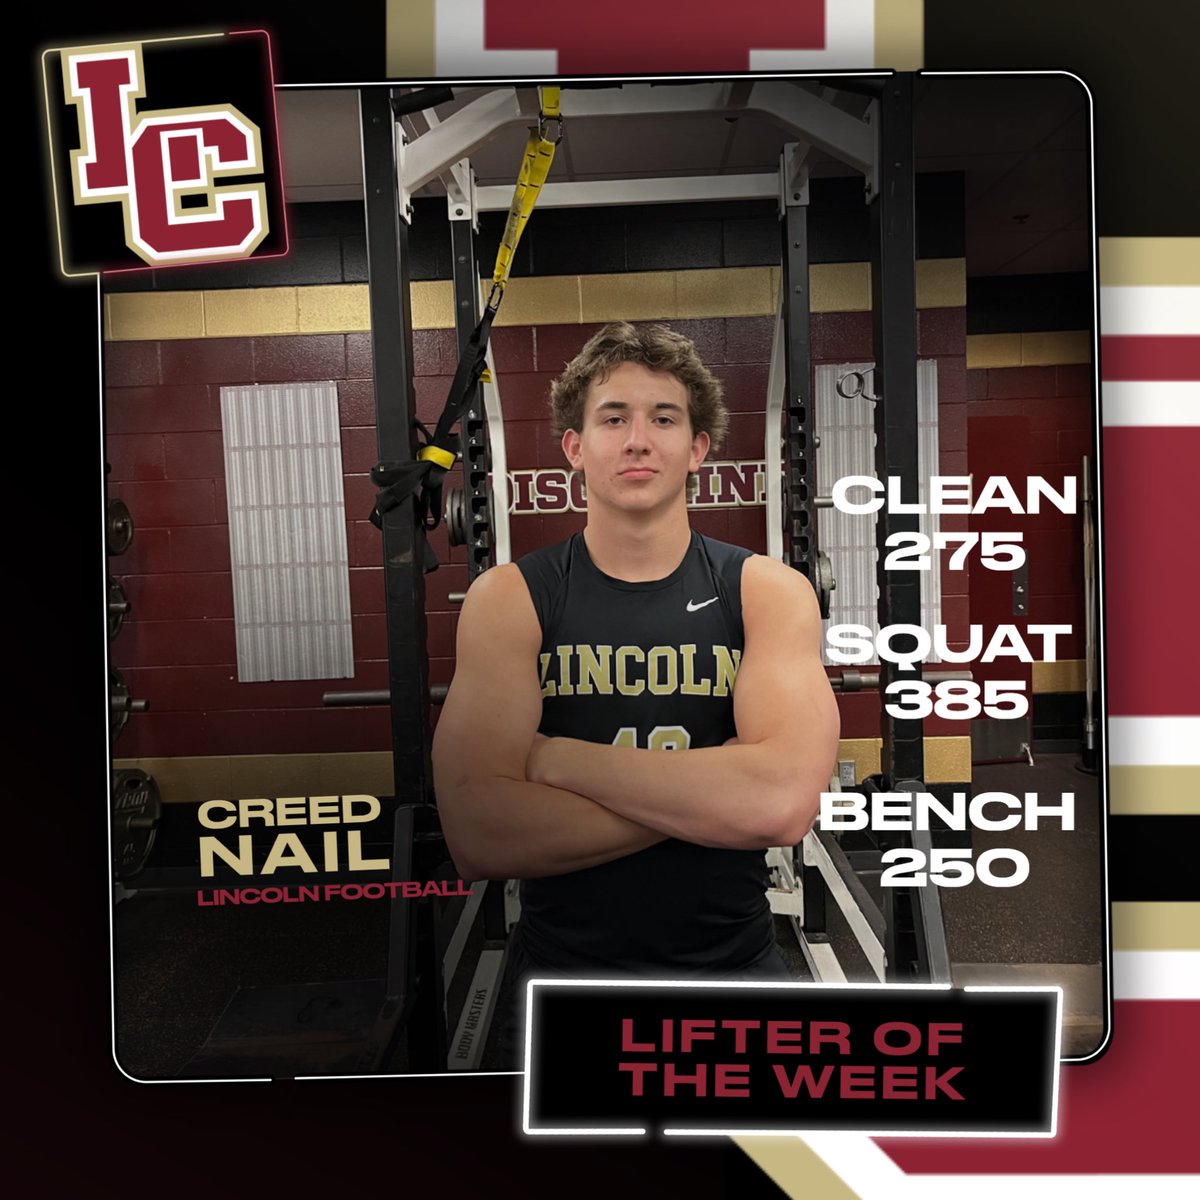 Congratulations to Creed Nail for earning our Lifter of the Week!